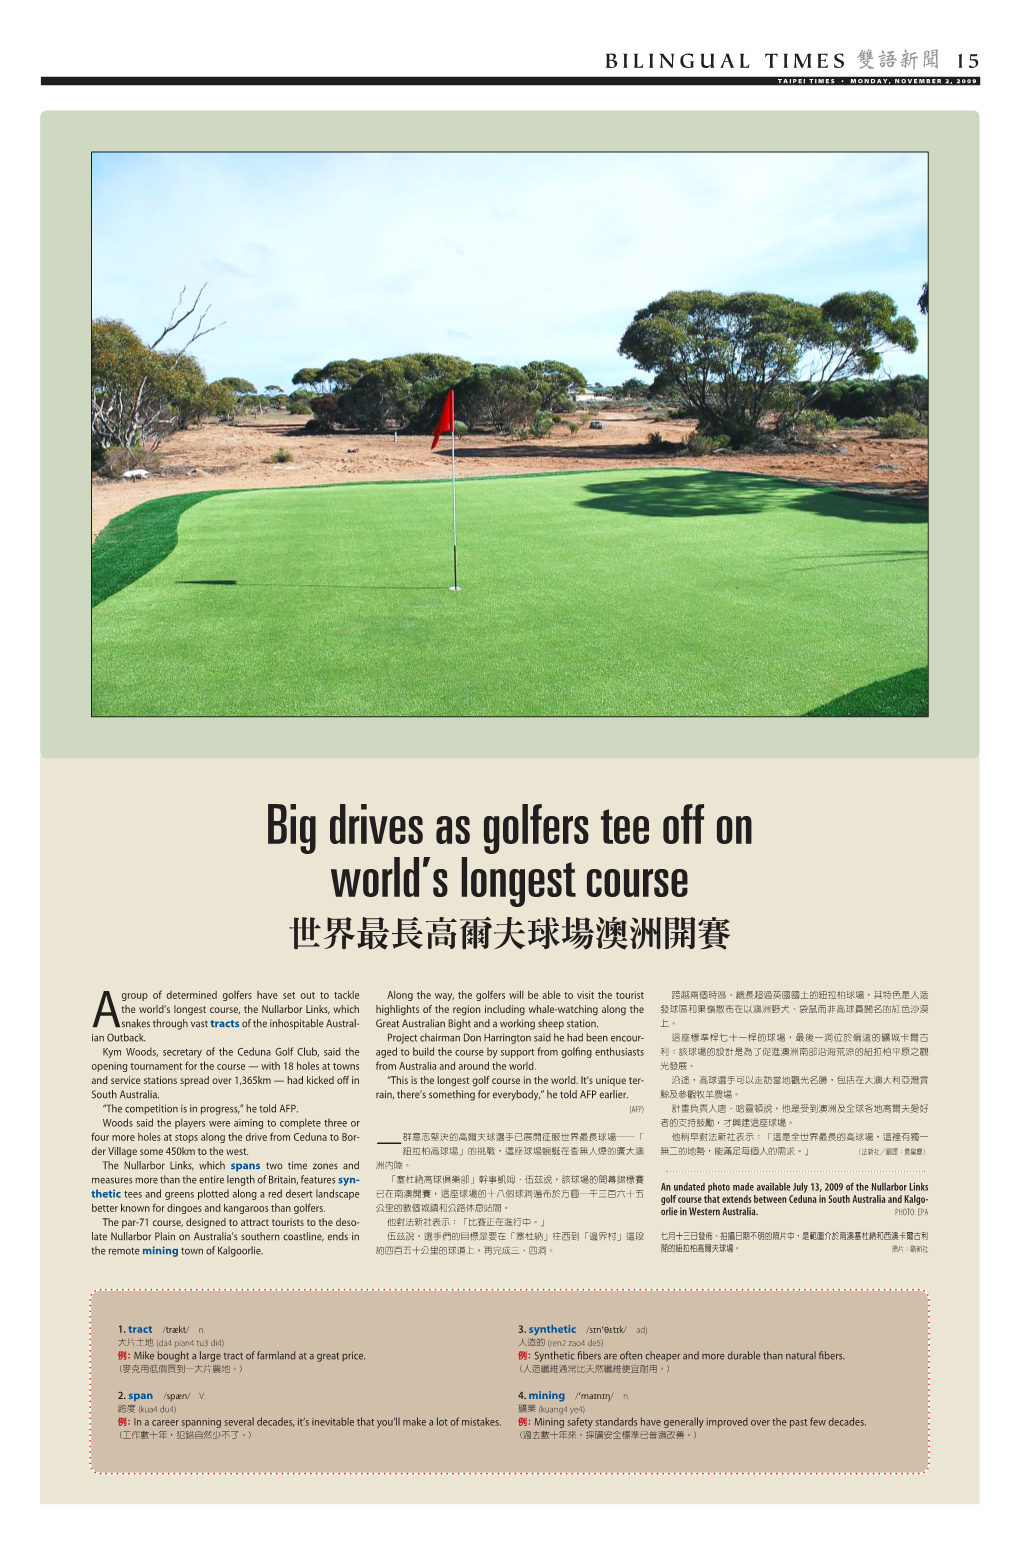 Big Drives As Golfers Tee Off on World's Longest Course